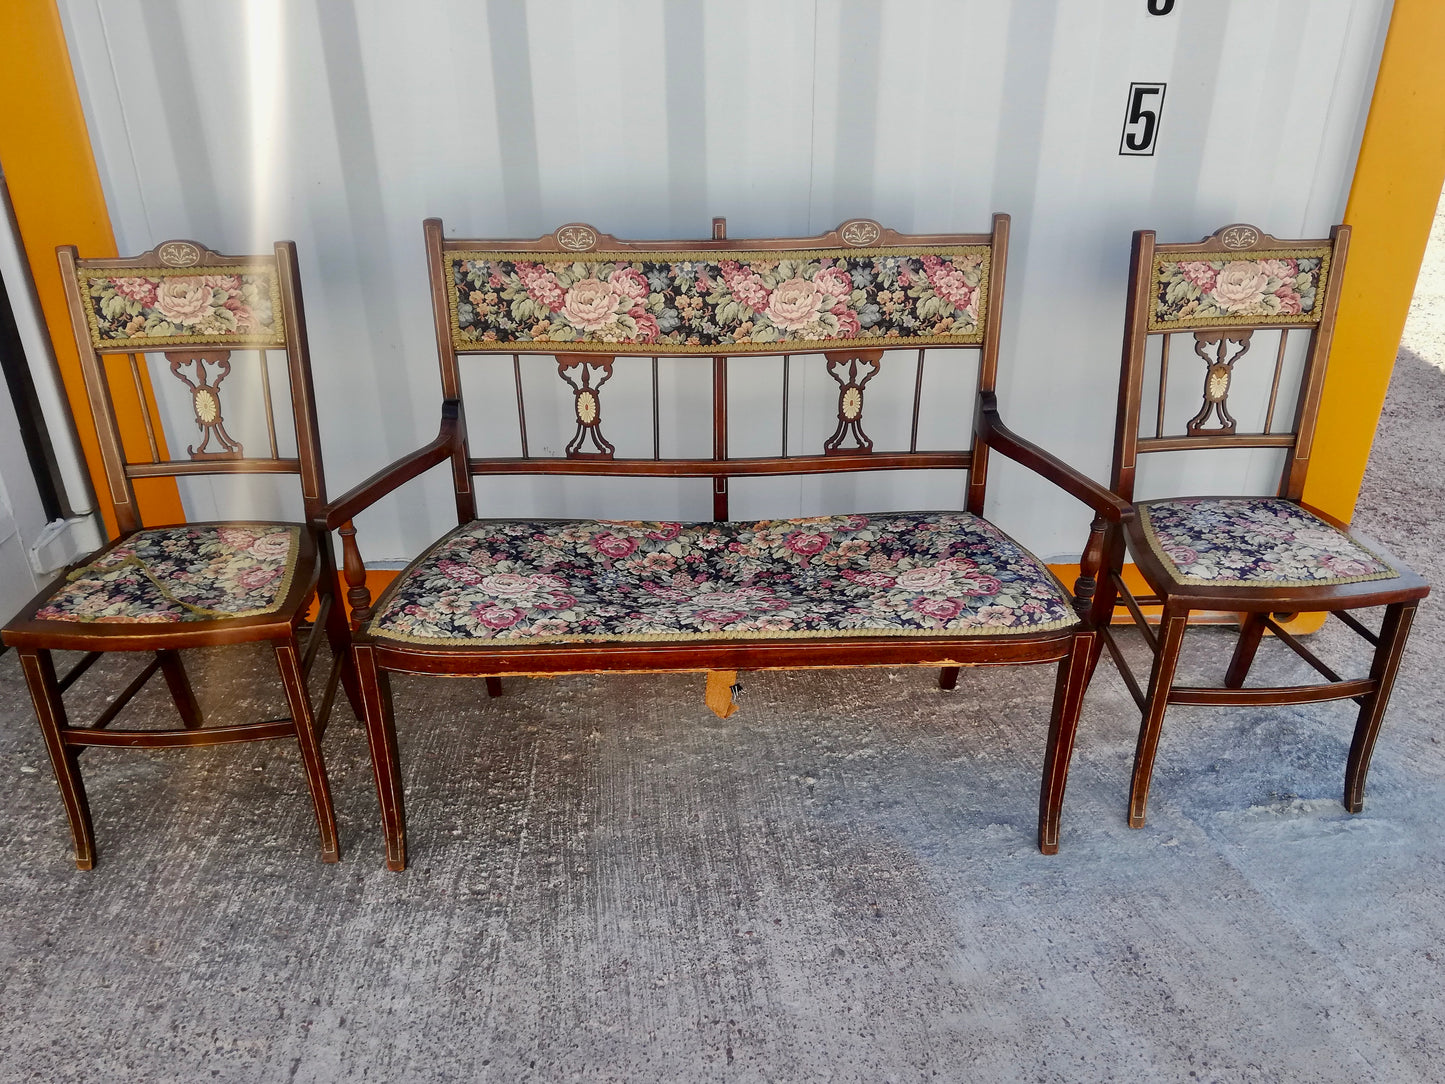 Commission for Elif - Pair of vintage Edwardian bedroom chairs